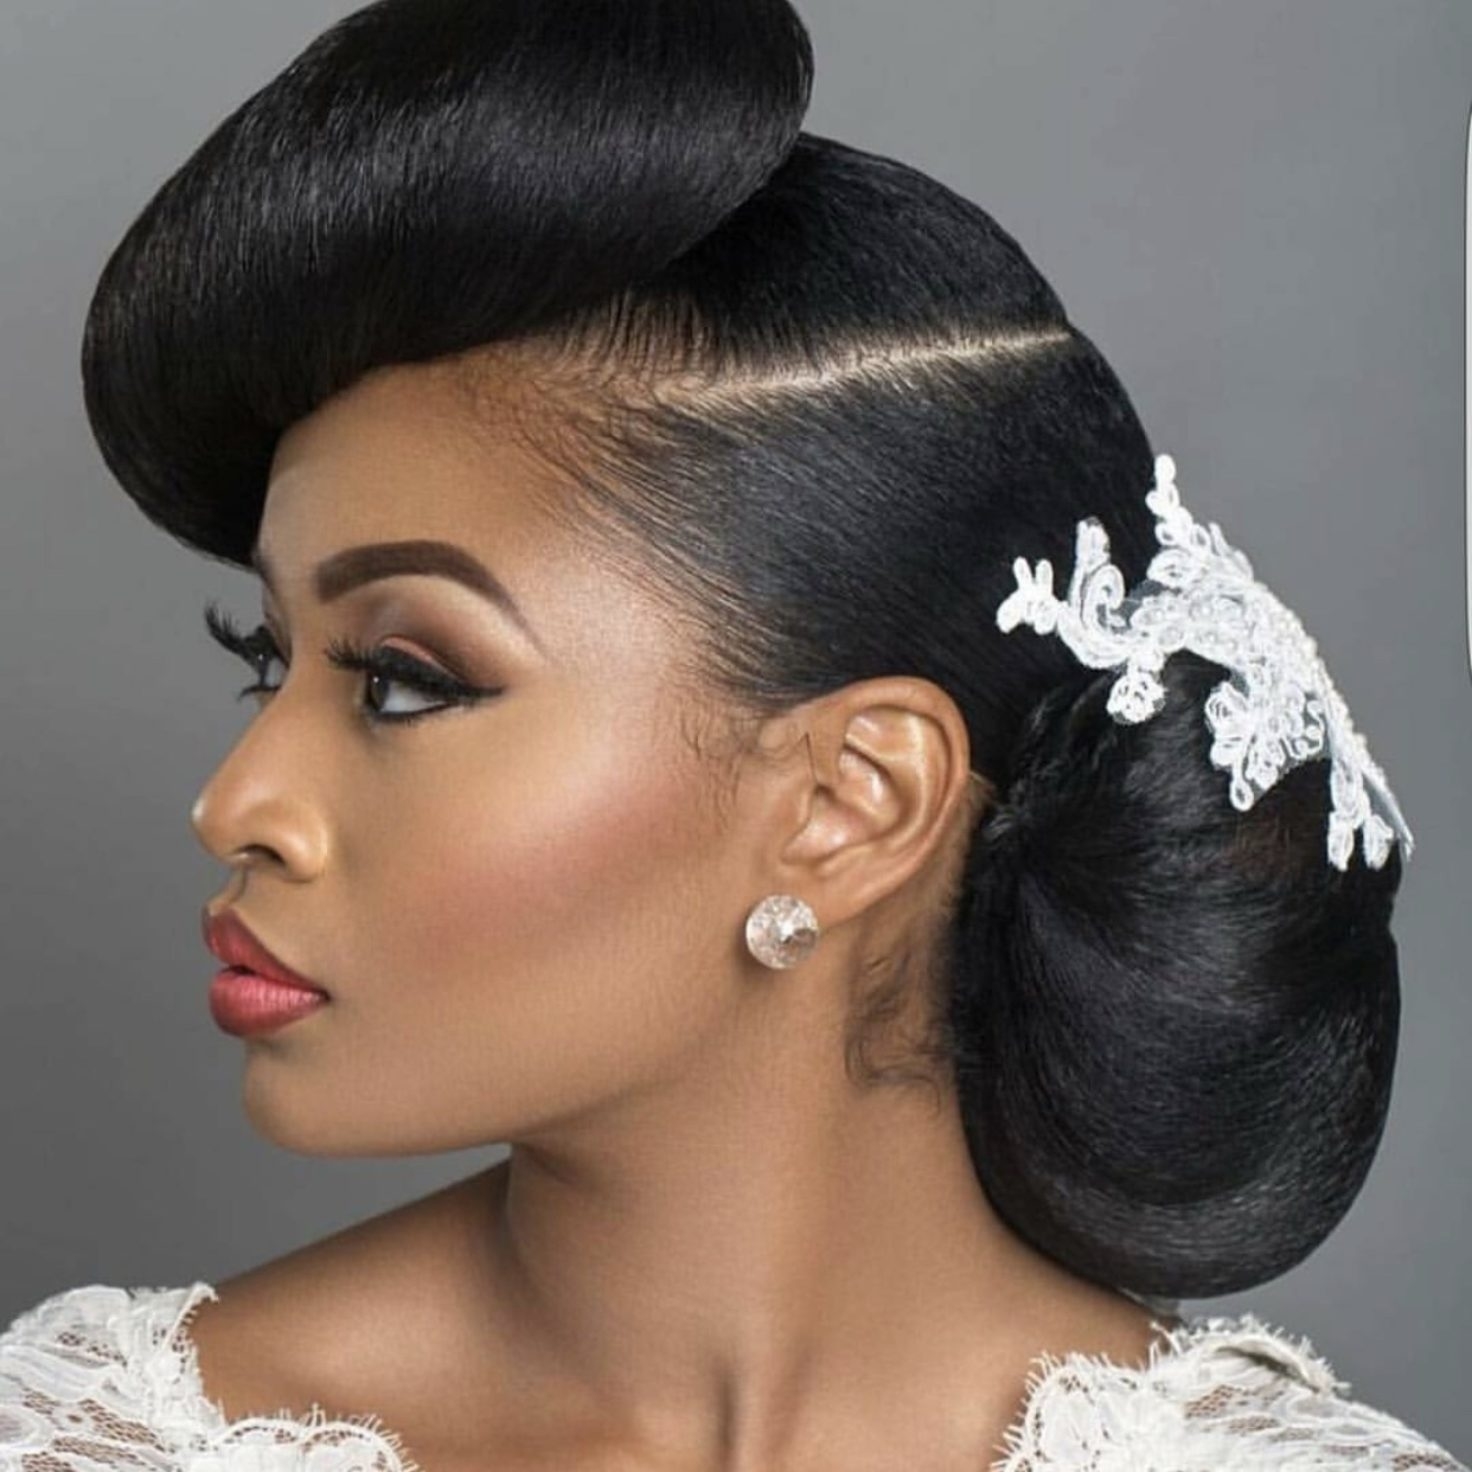 13 Natural Hairstyles For Your Wedding Day Slay - Essence pertaining to Natural Hairstyles For Brides